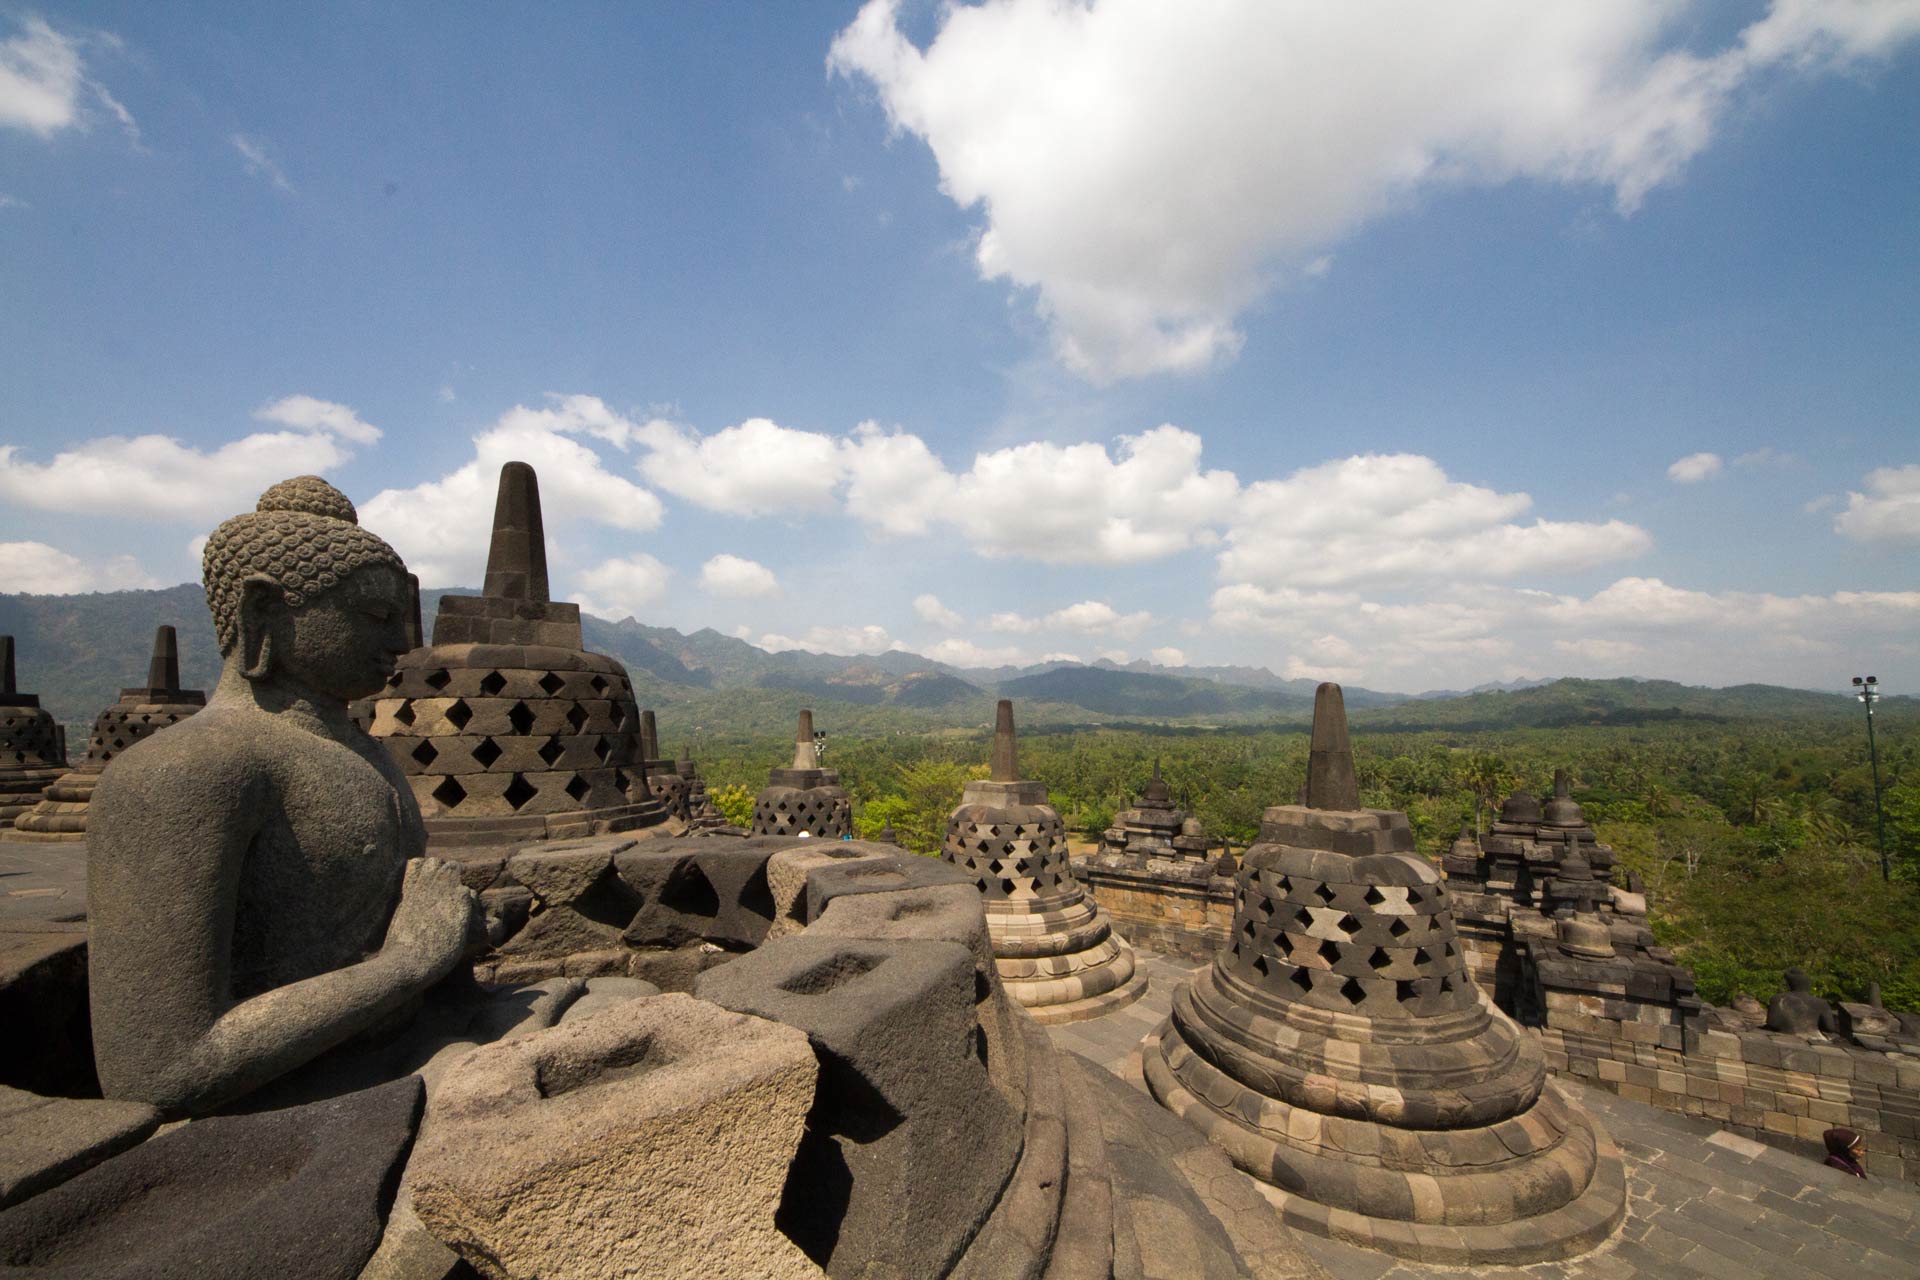 Buddha statue with the hand position of dharmachakra mudra  amidst the latticed stone stupas containing Buddha statues on the upper terrace, Borobudur Temple Compounds, Central Java, Indonesia